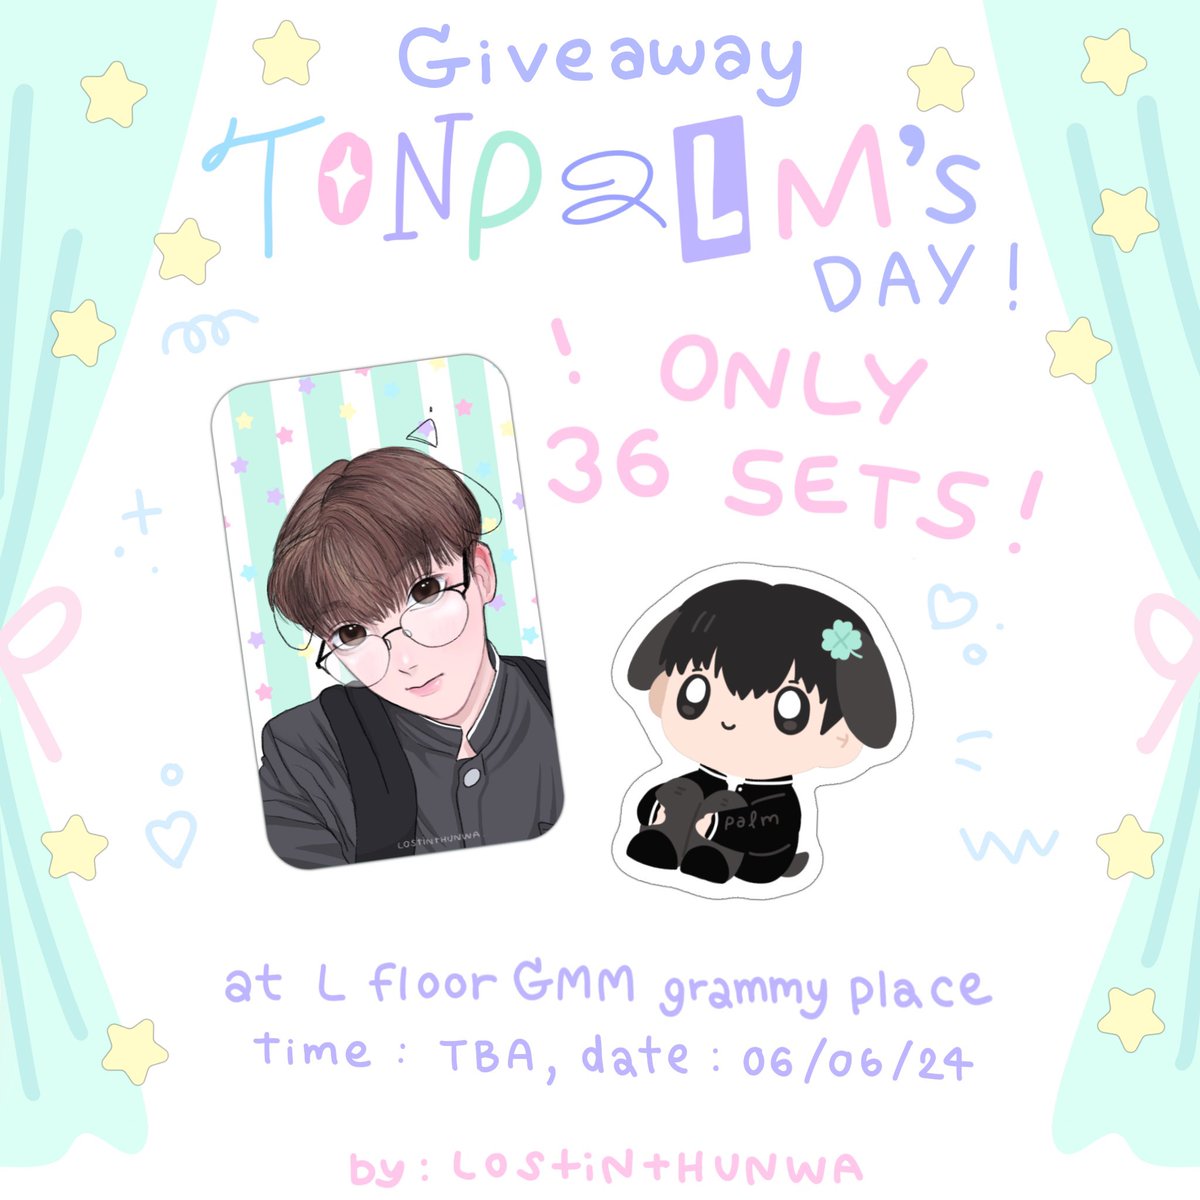 𓈒 ݁⋆ pls kindly retweet 𓈒 ݁⋆
 𝓖 iveaway ♡ 。TONPALM’s DAY 🍀

✿ photo card
✿ sticker
only 6*6 = 36 sets !

🗓️ : 06/06/24
🕰️ : TBA
📍: L floor GMM grammy place

exchange pls dm ♡
#PERSES #PERSES_TH 🐾
#happyPALMday #PALM_PERSES